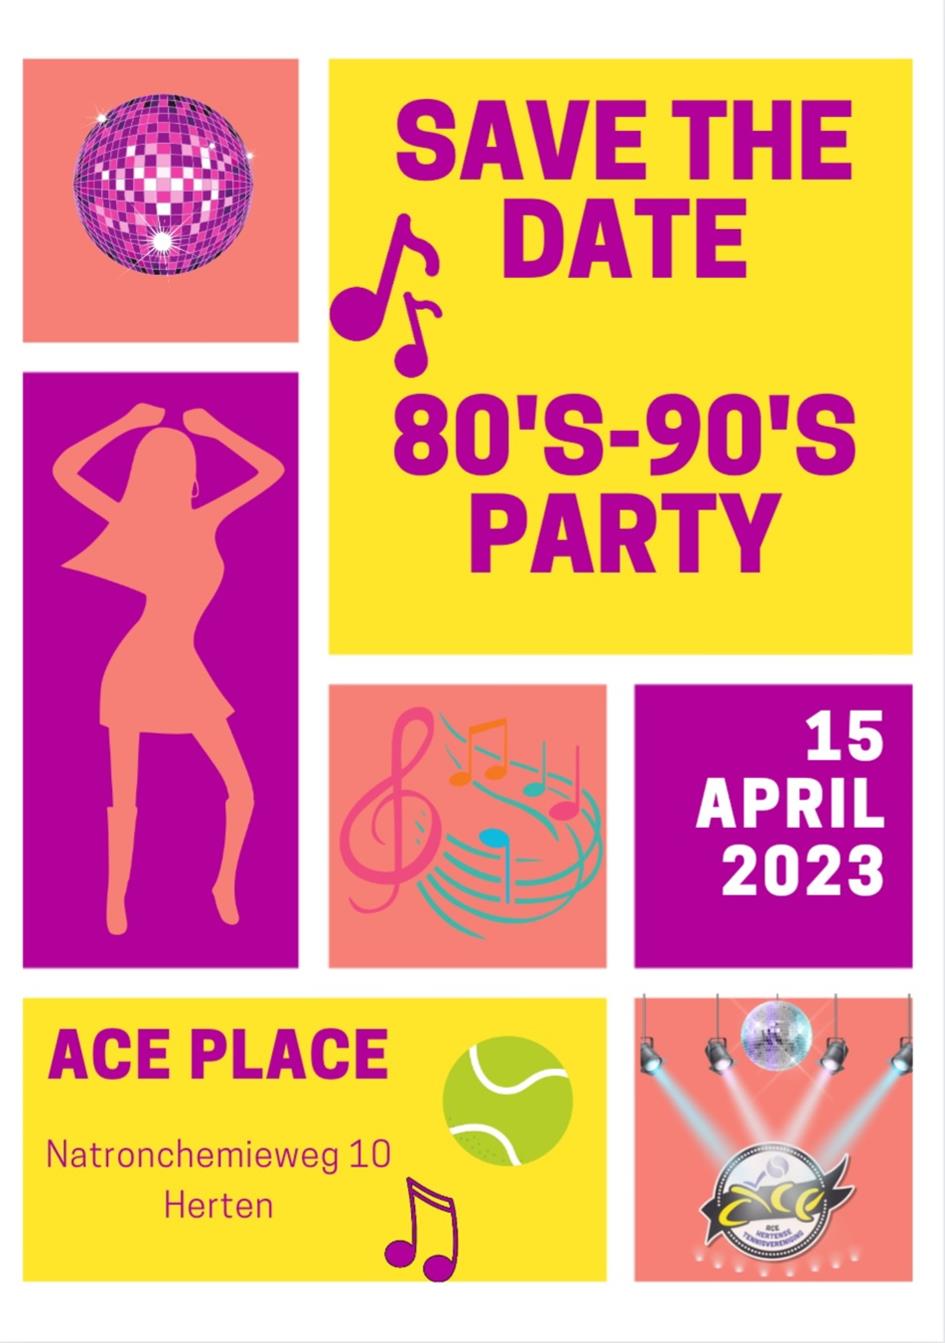 20230415 Save the date 80's-90's party.jpg